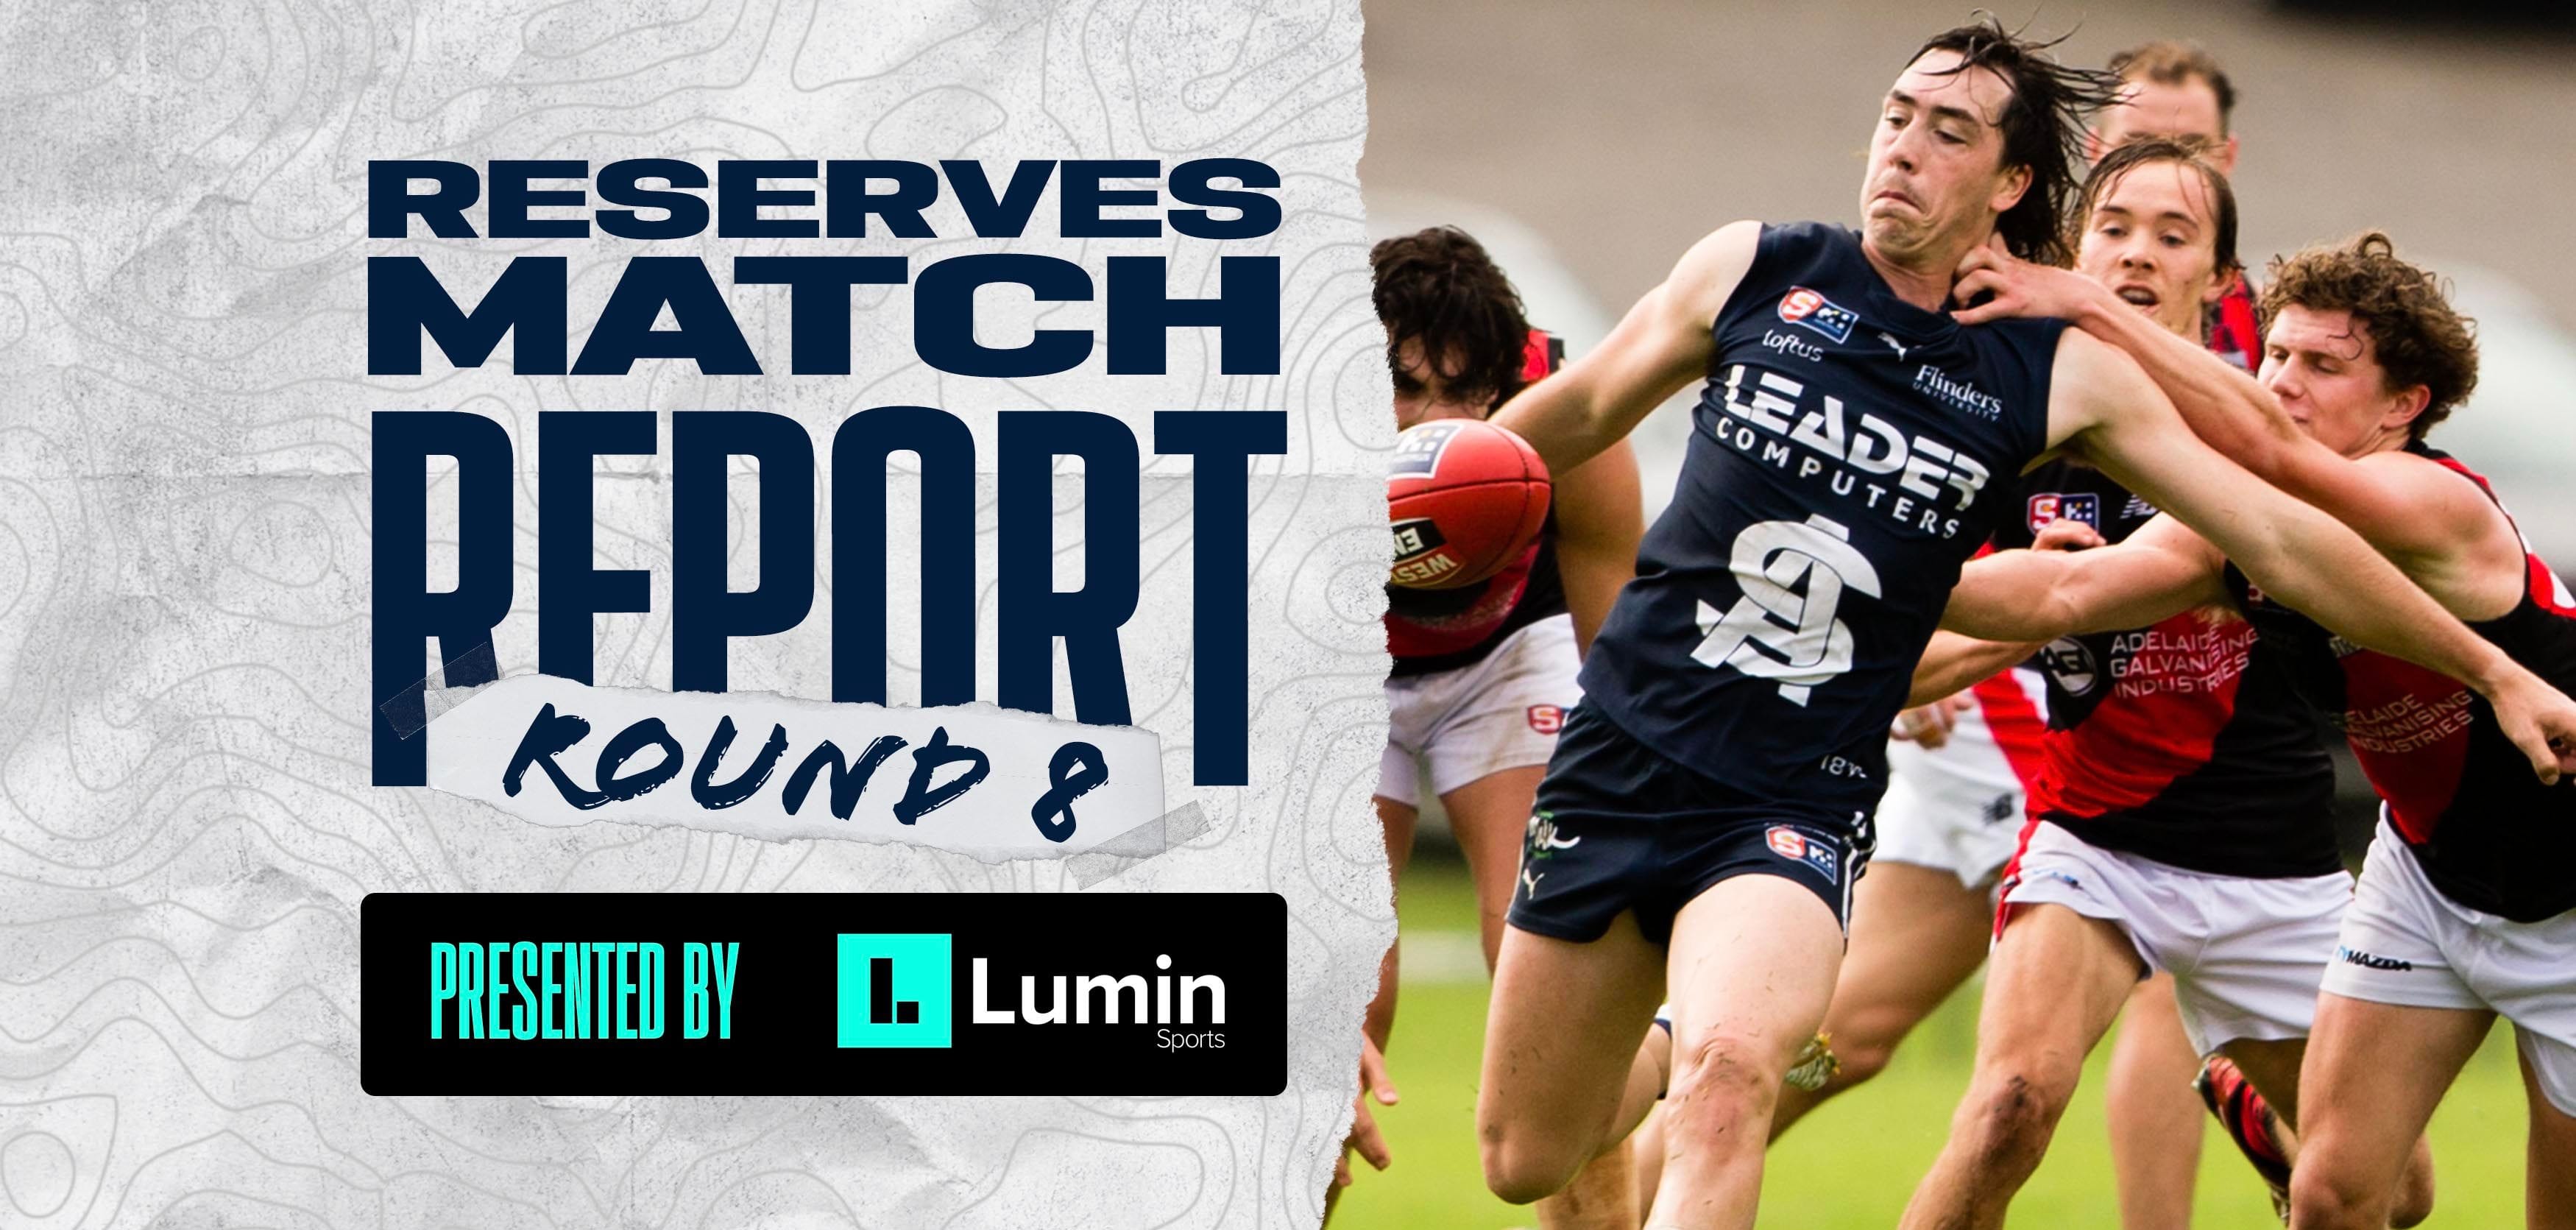 Lumin Sports Match Report: Reserves Round 8 vs West Adelaide